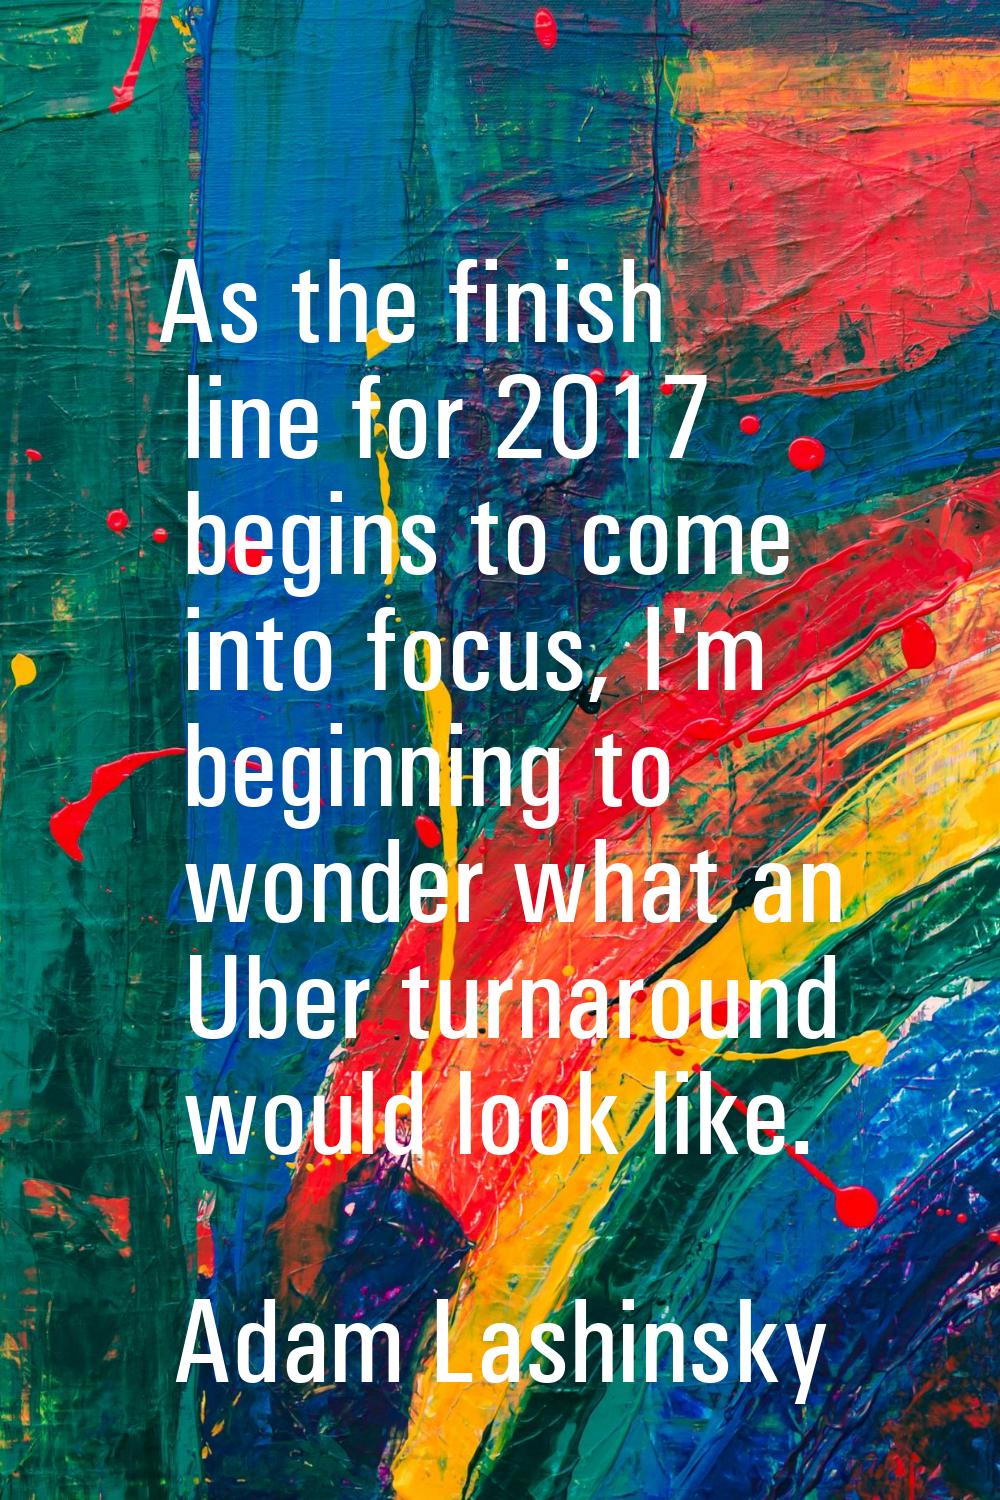 As the finish line for 2017 begins to come into focus, I'm beginning to wonder what an Uber turnaro